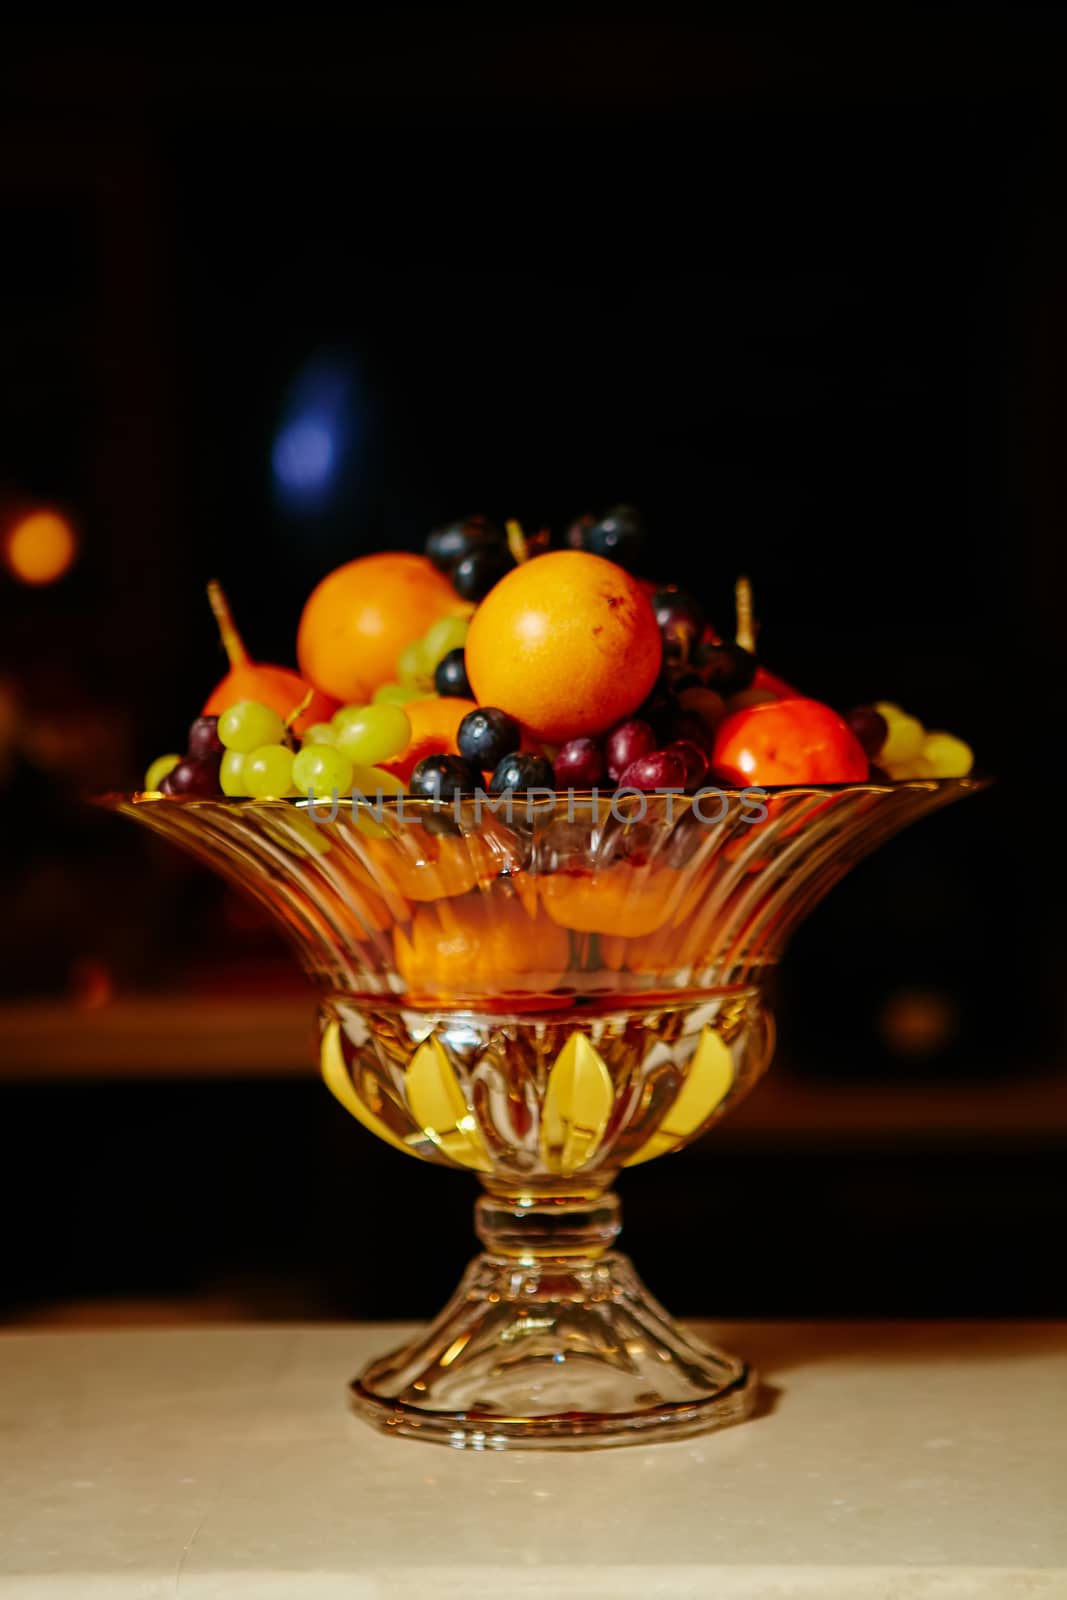 Assortment of juicy fruits on wooden table, on black background